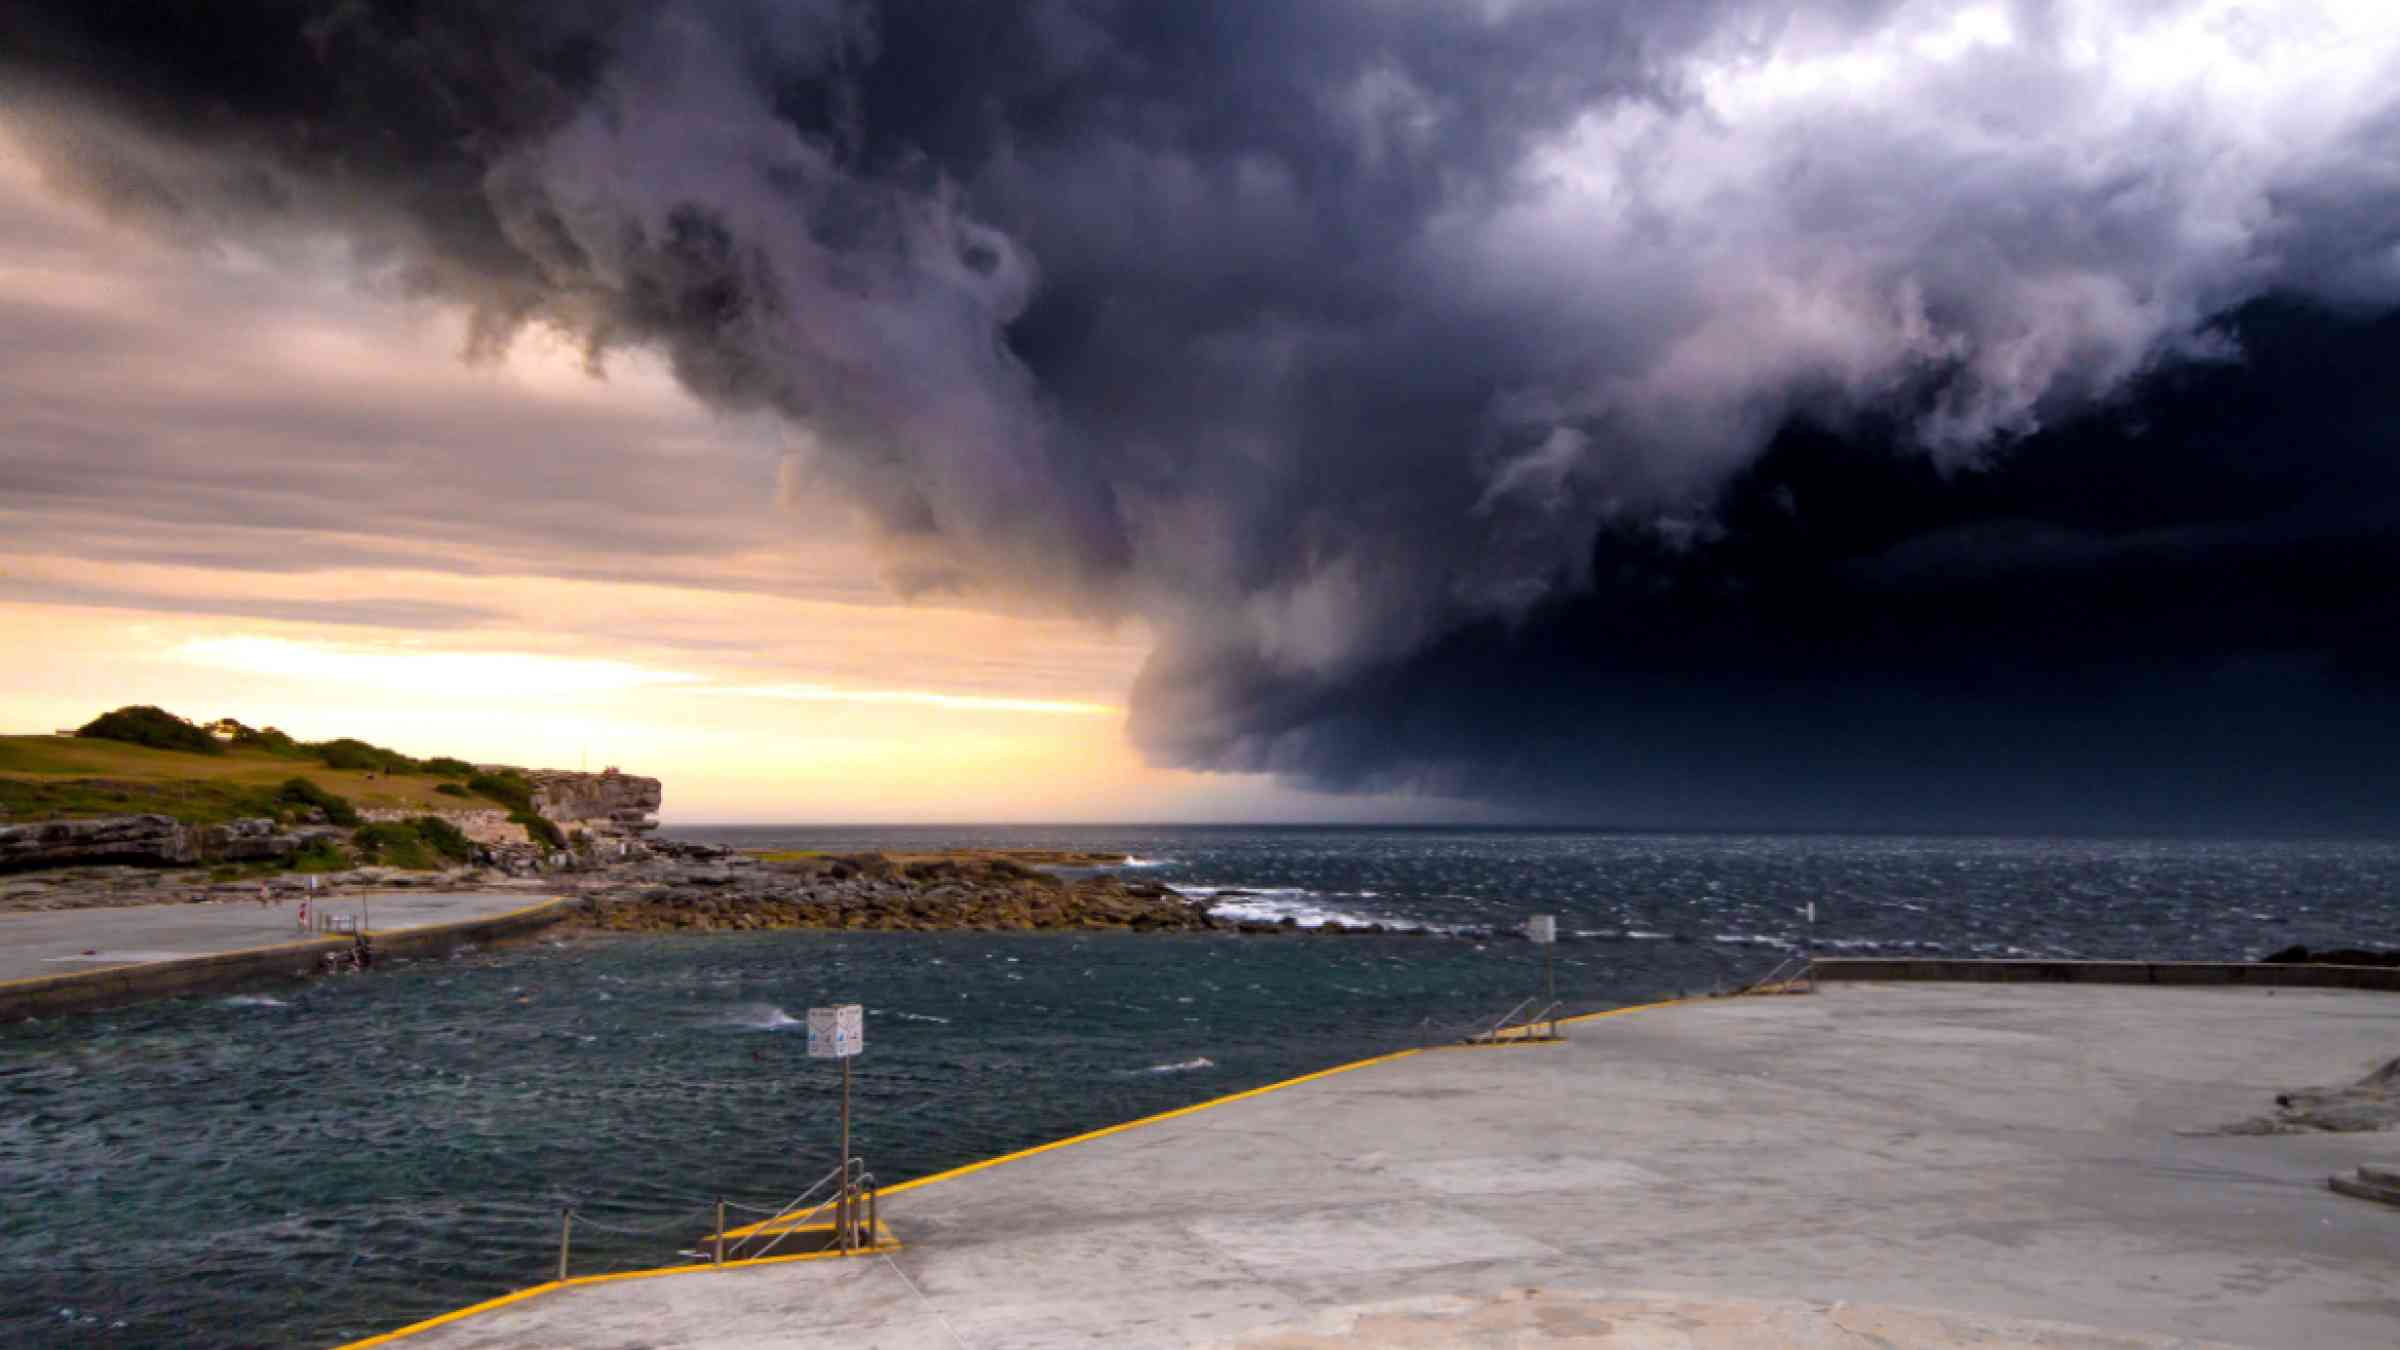 Big storm approaching the coastal front in Australia